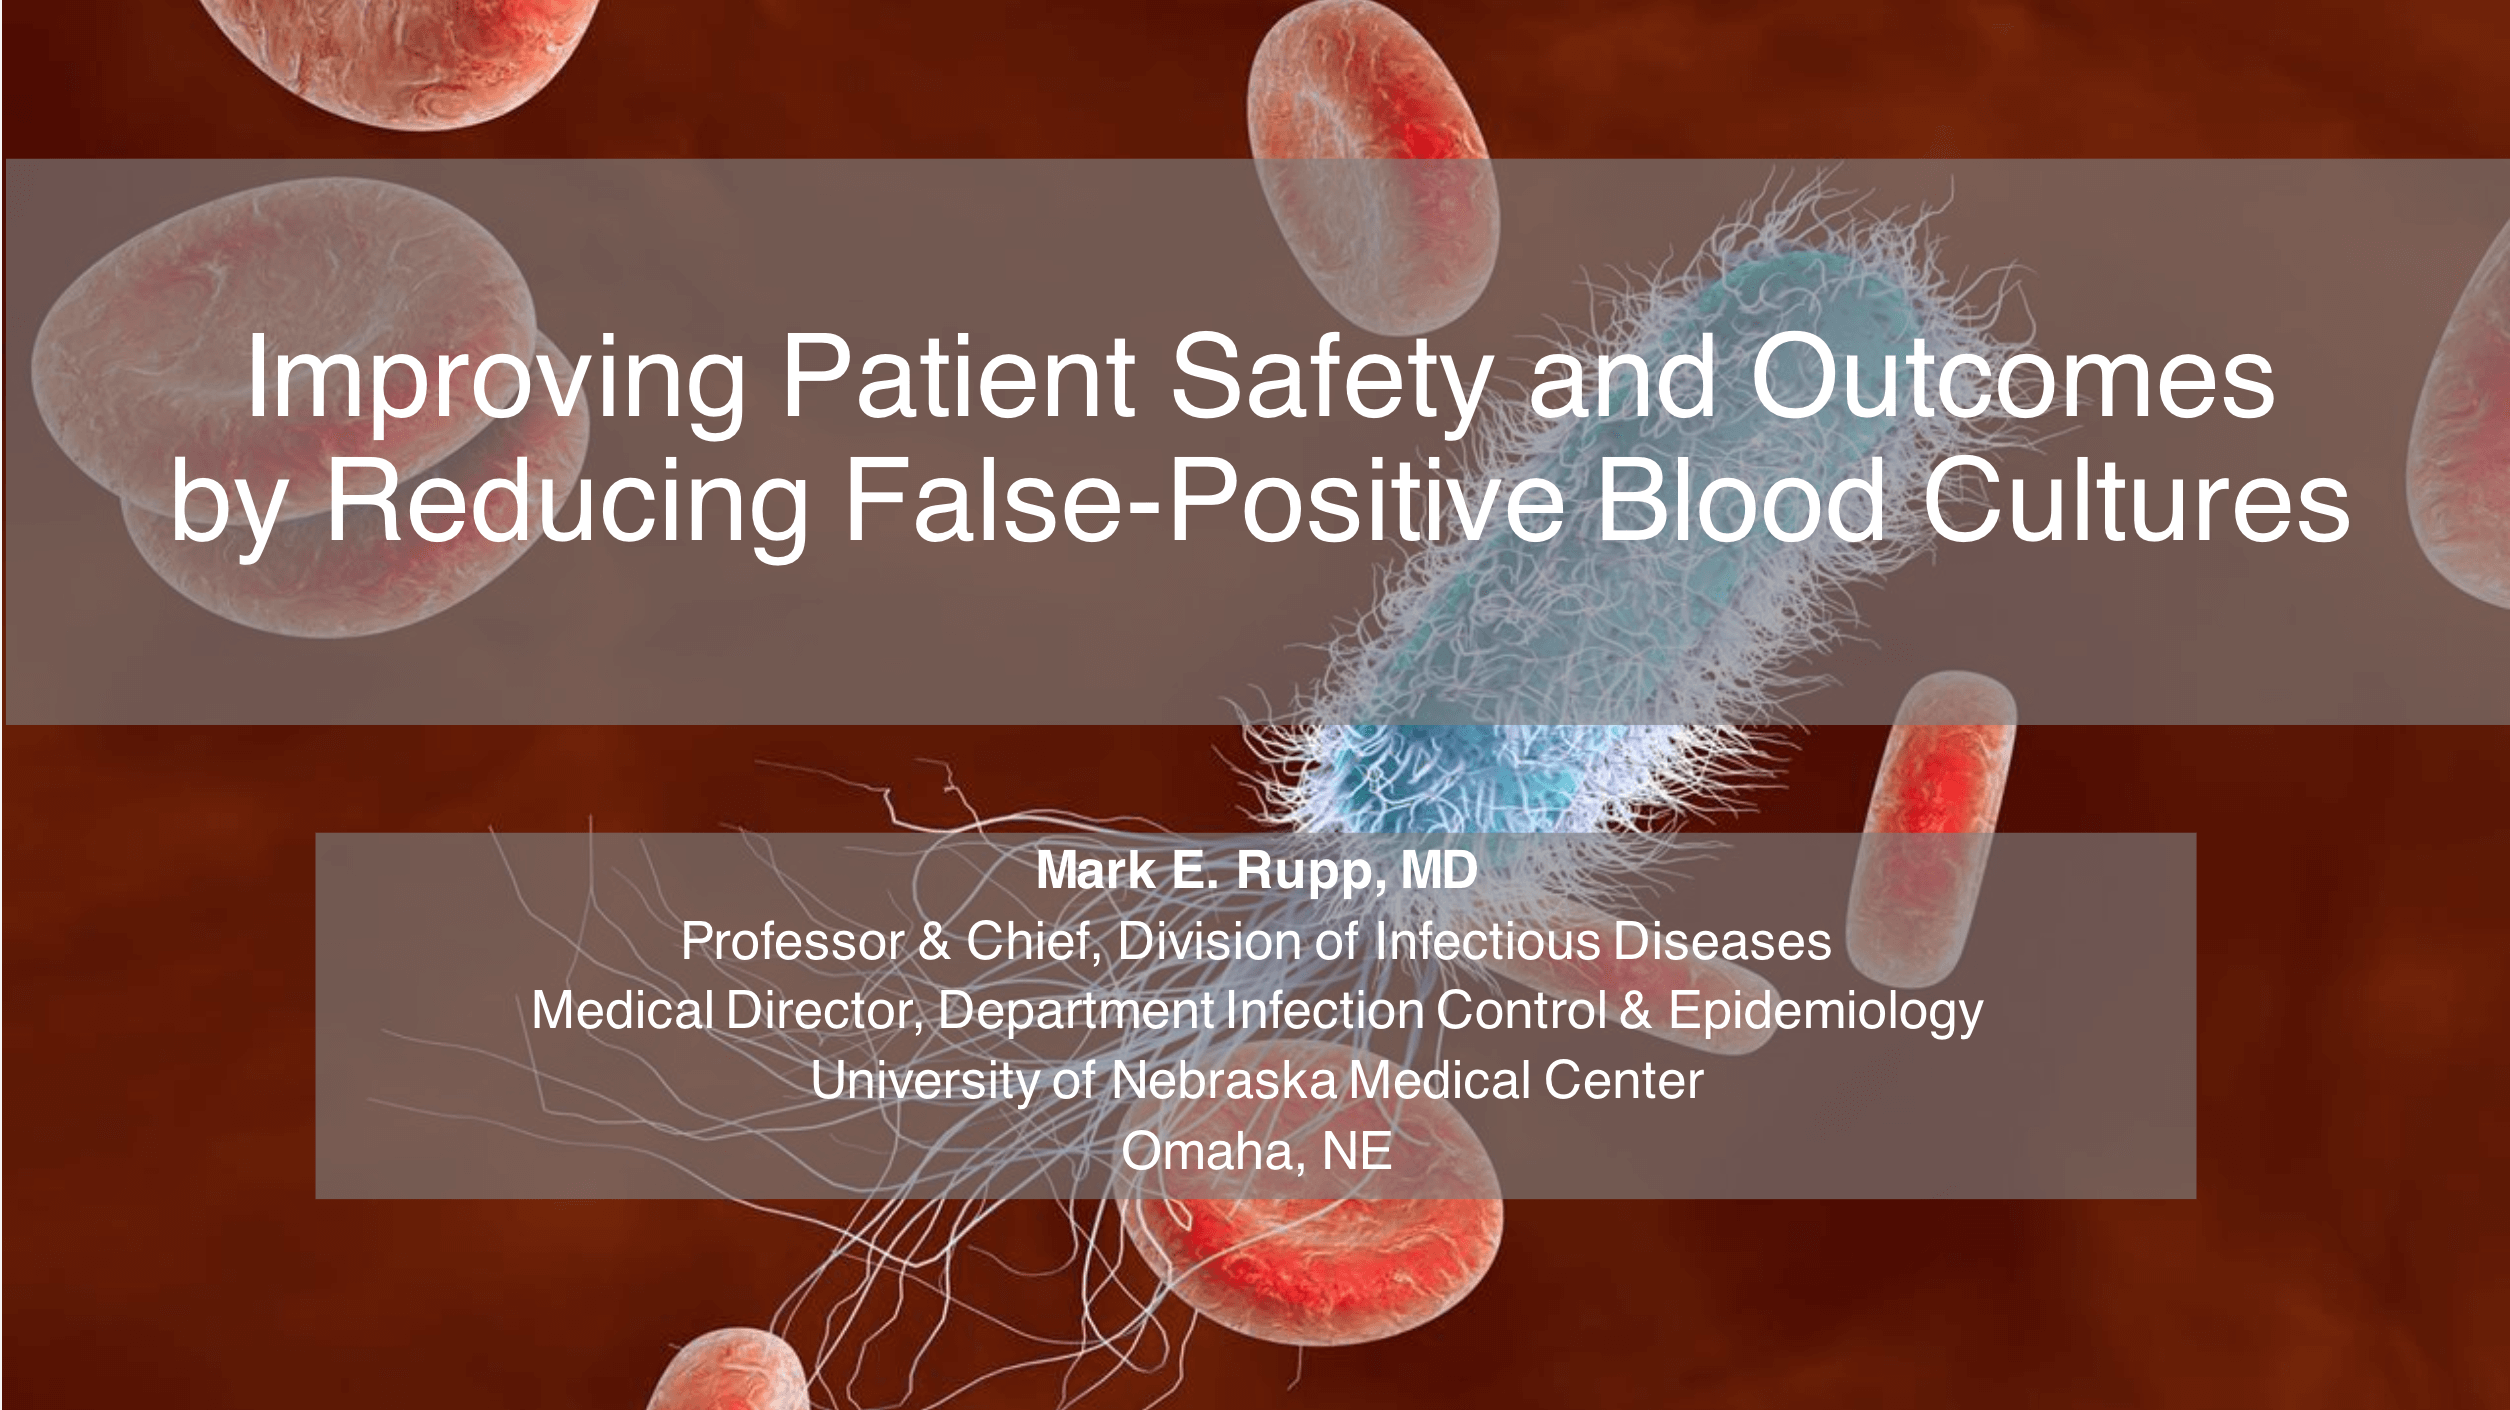 Drive Antimicrobial Stewardship by Eliminating False-Positive Blood Cultures